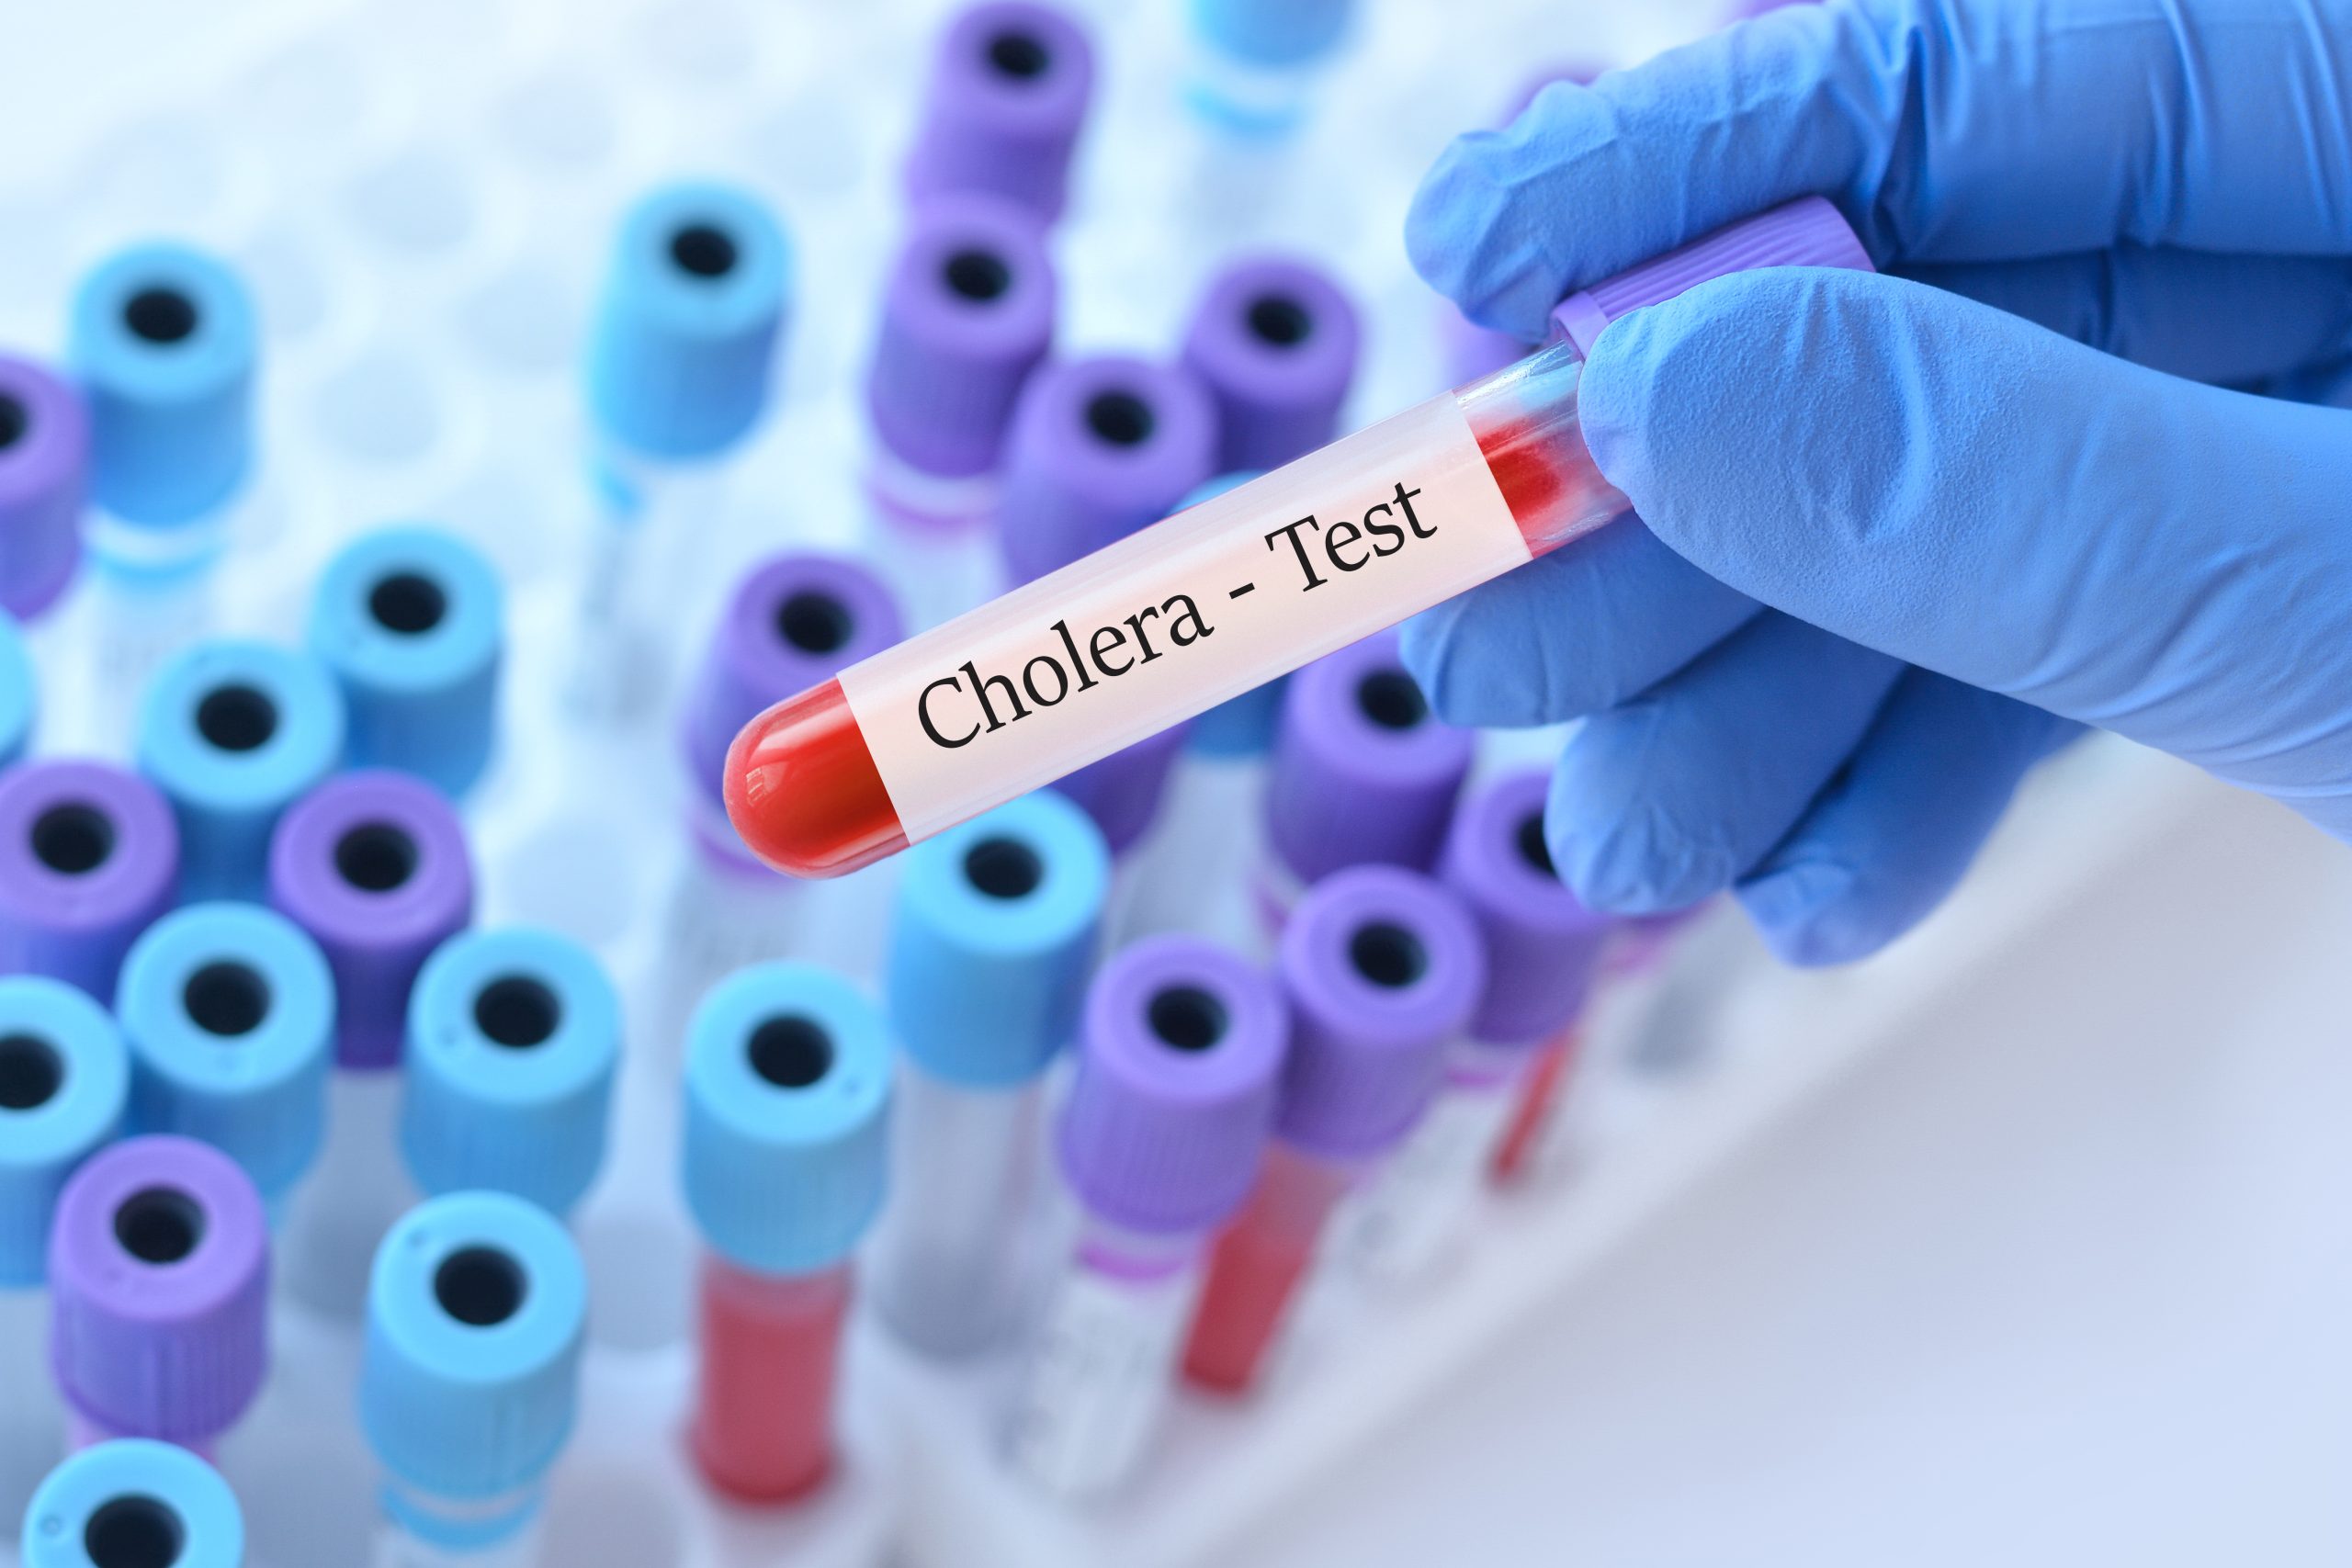 Doctor holding a test blood sample tube with Cholera test on the background of medical test tubes with analyzes.